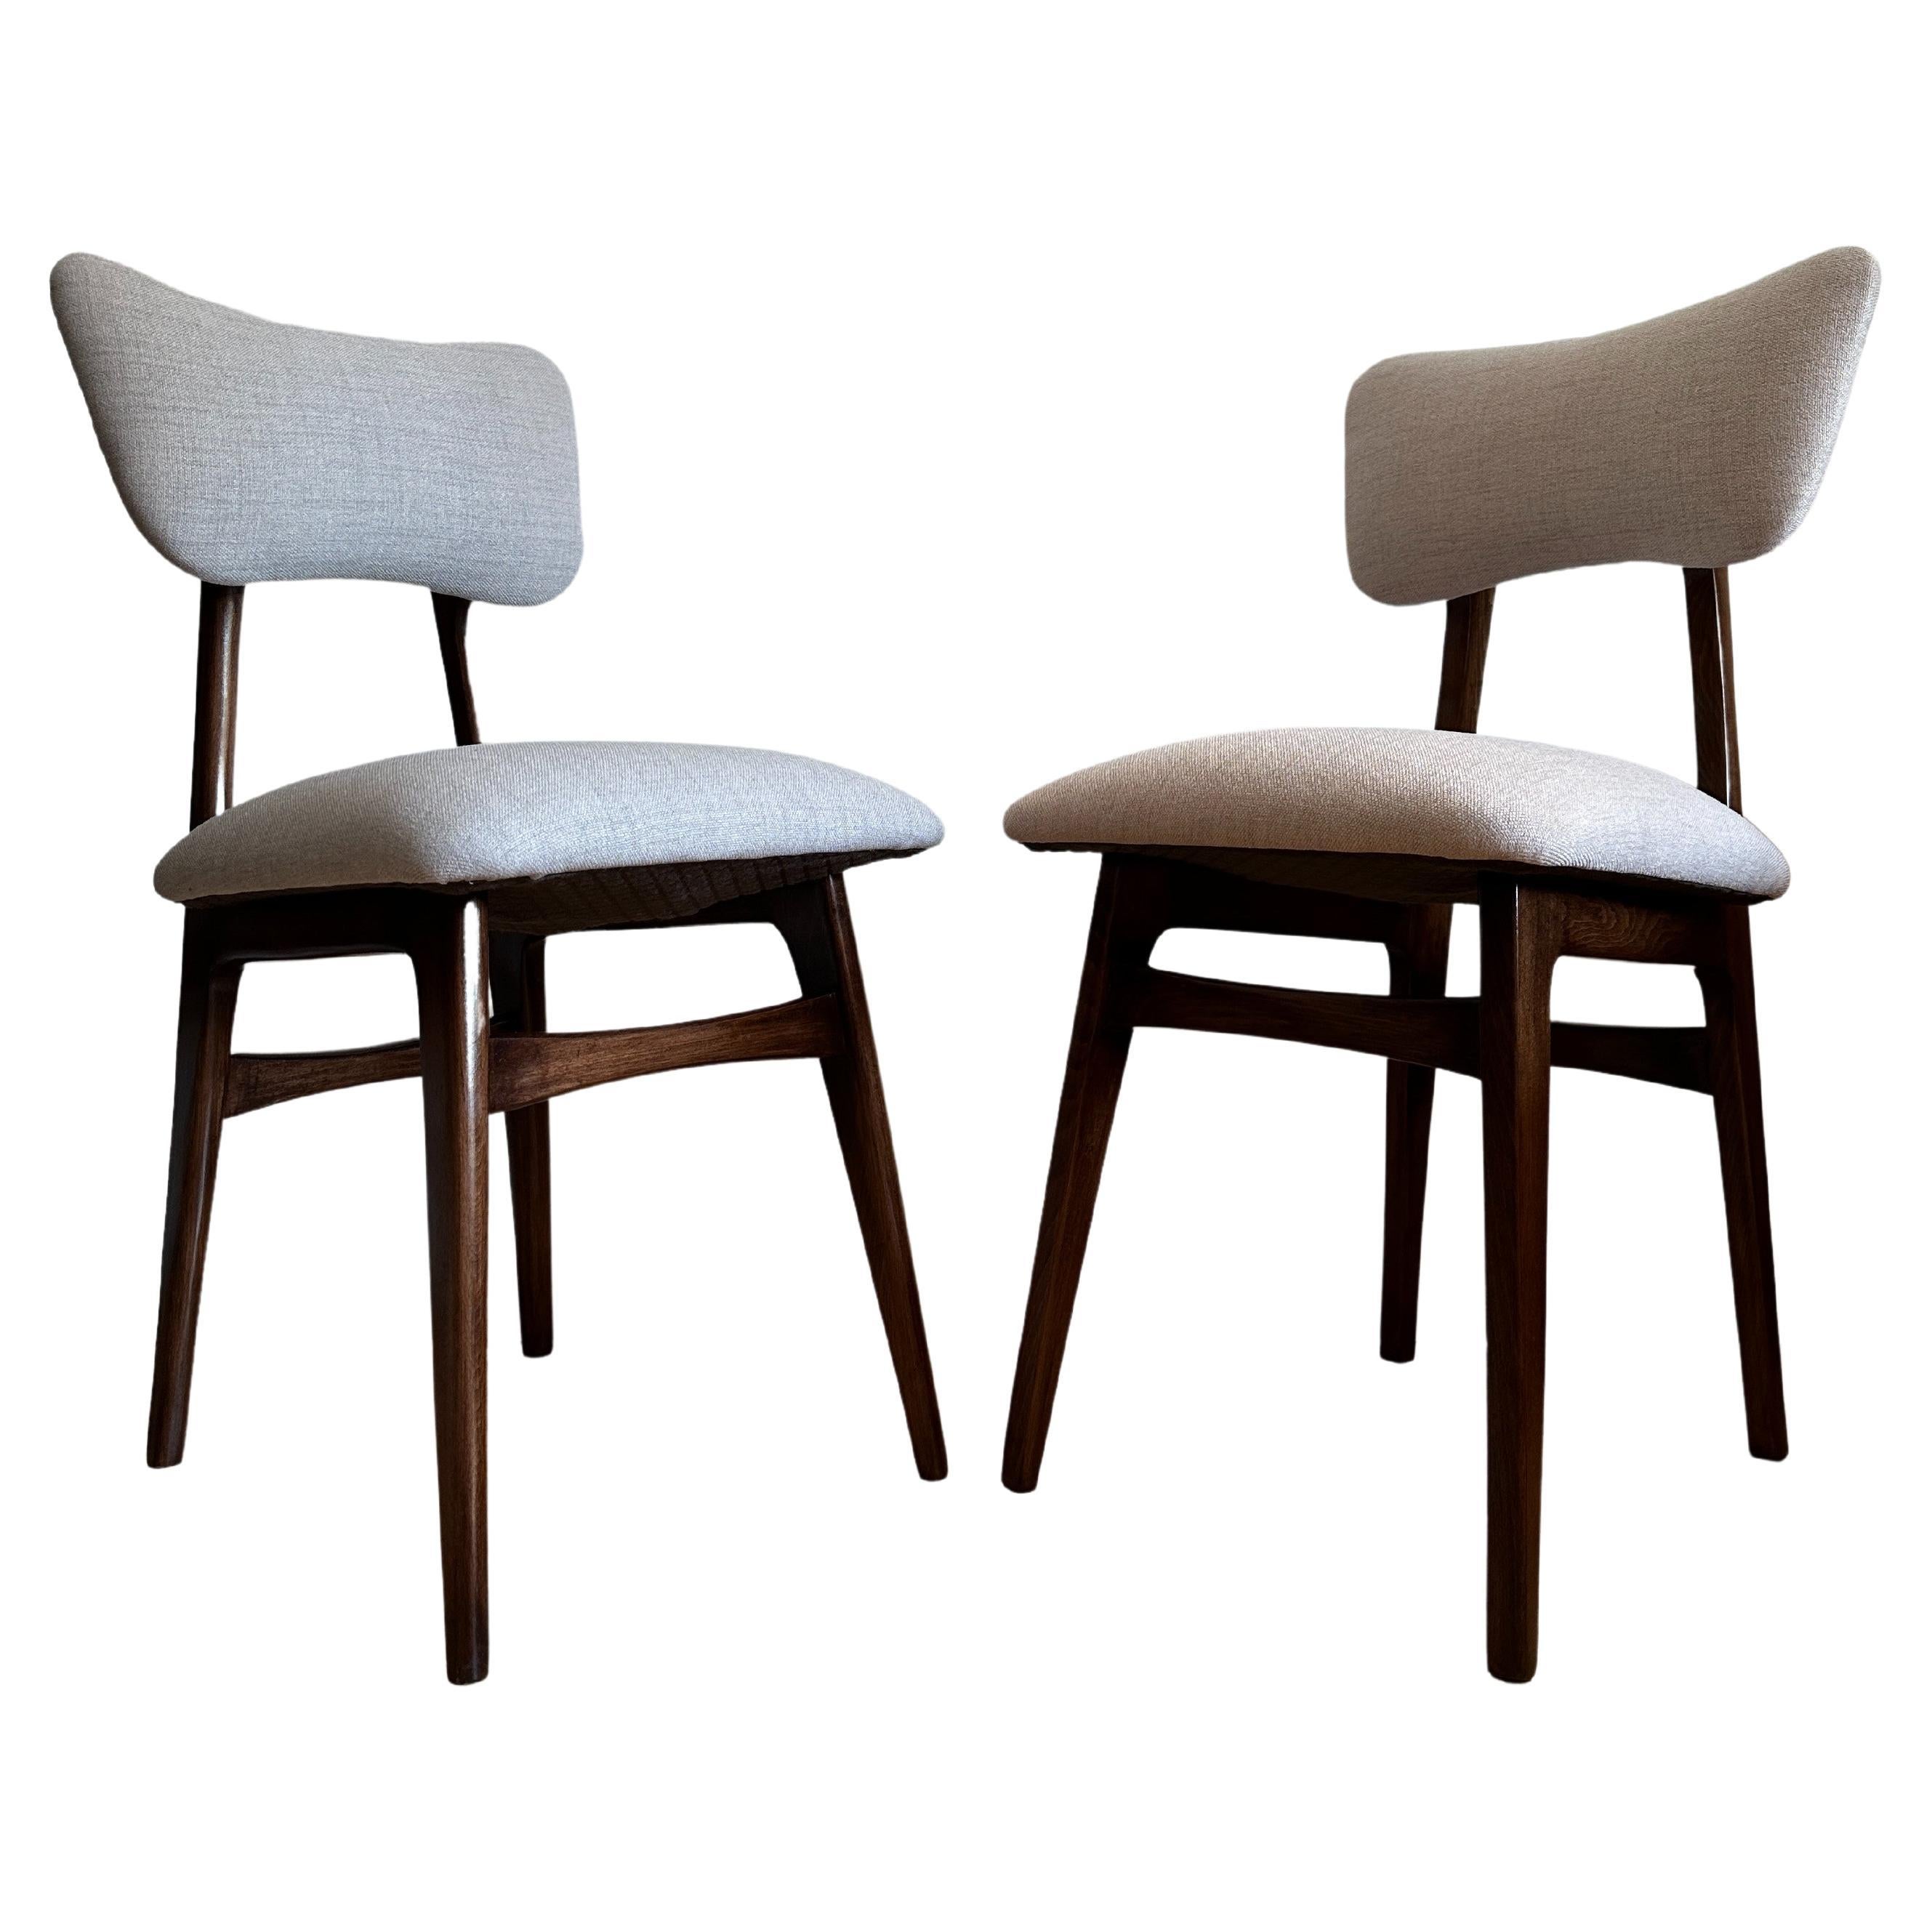 Set of 2 Midcentury Beige and Grey Dining Chairs, Europe, 1960s For Sale